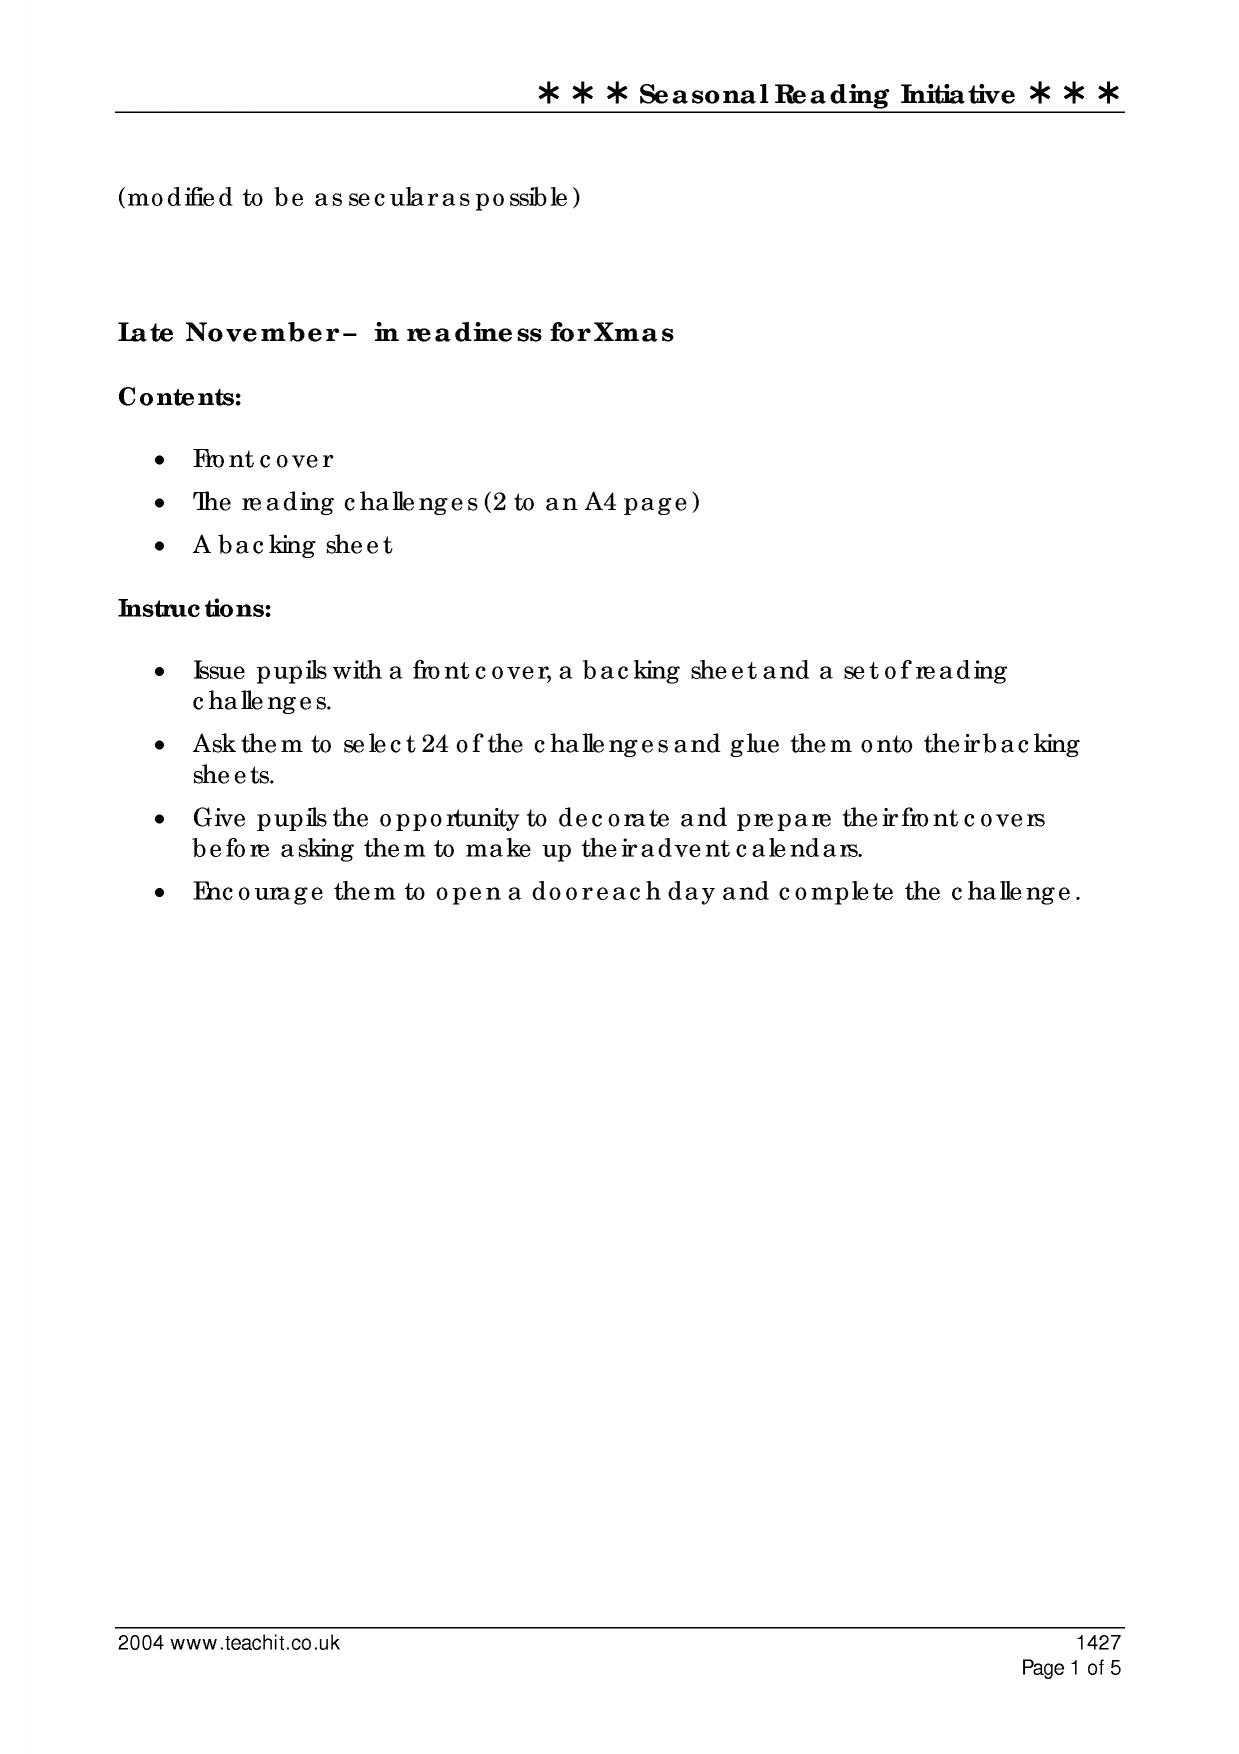 Valley forge Worksheet Pdf together with Ks3 Reading Independent Reading